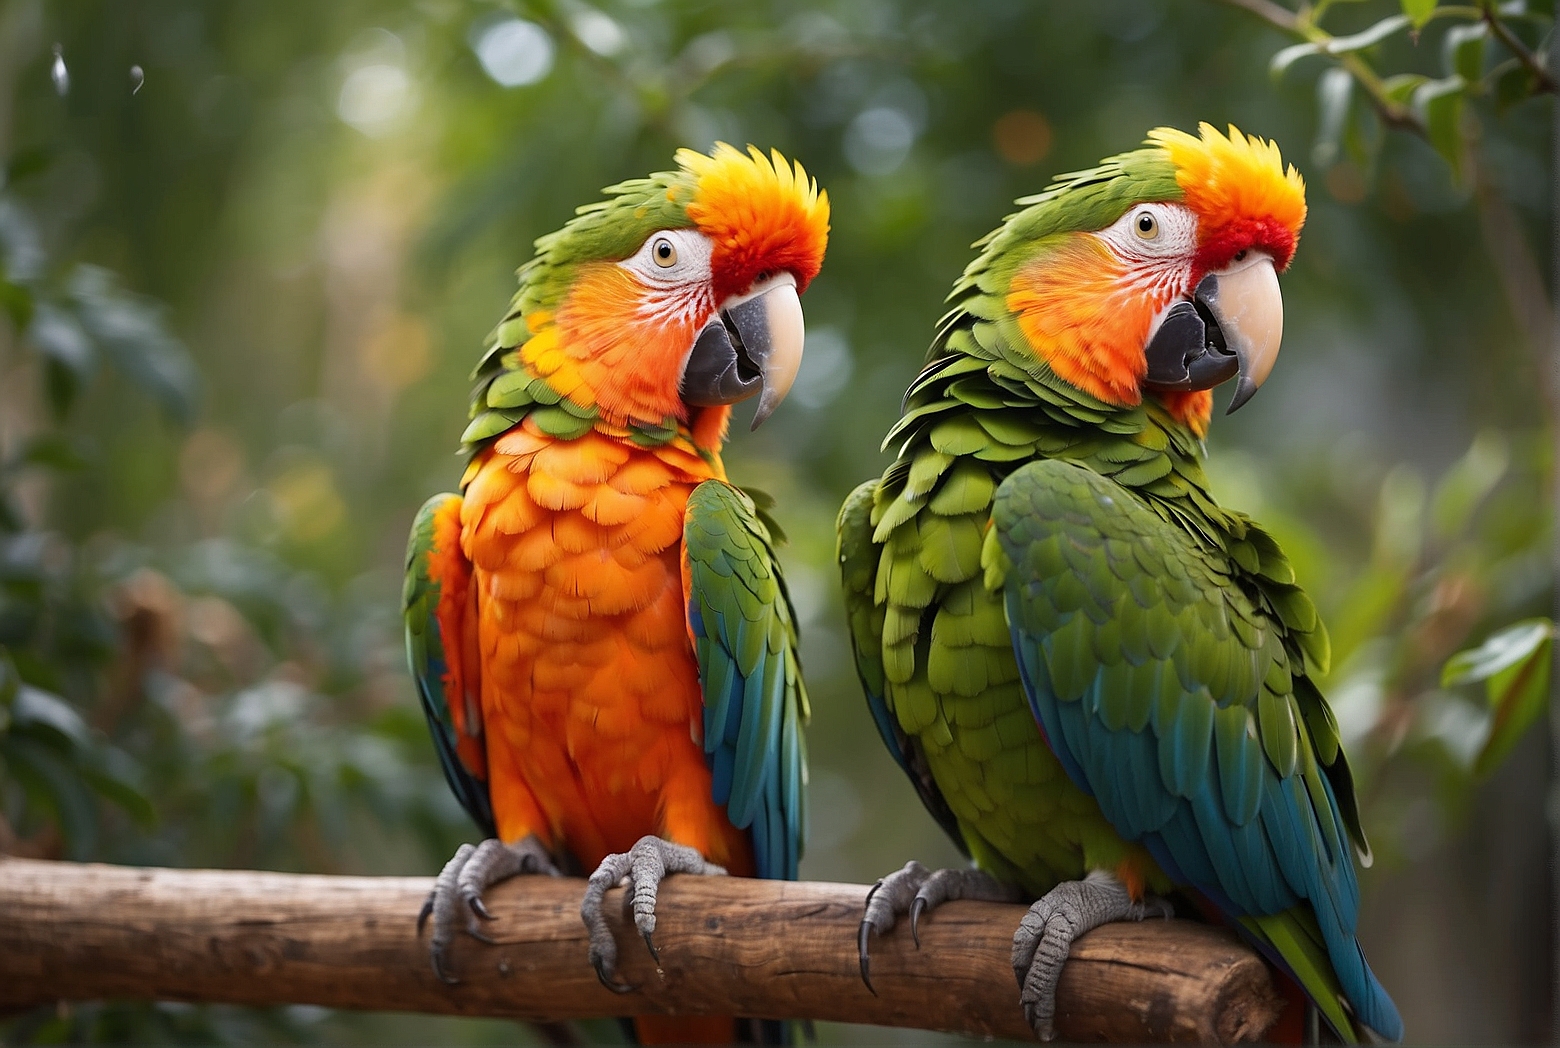 Why Can Parrots Talk but Not Other Animals